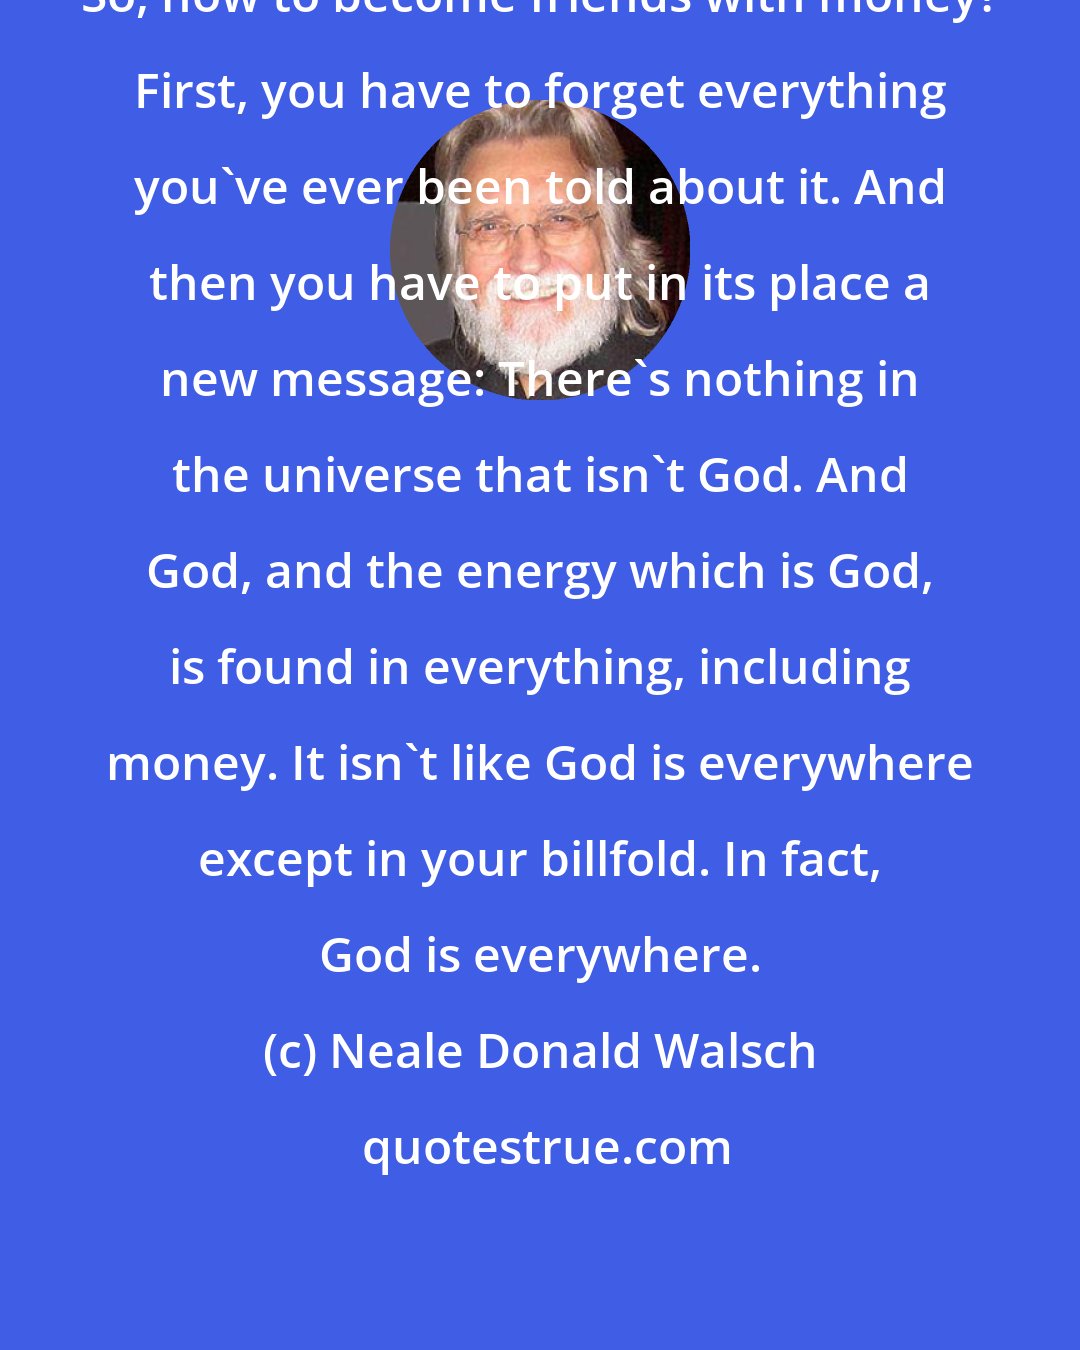 Neale Donald Walsch: So, how to become friends with money? First, you have to forget everything you've ever been told about it. And then you have to put in its place a new message: There's nothing in the universe that isn't God. And God, and the energy which is God, is found in everything, including money. It isn't like God is everywhere except in your billfold. In fact, God is everywhere.